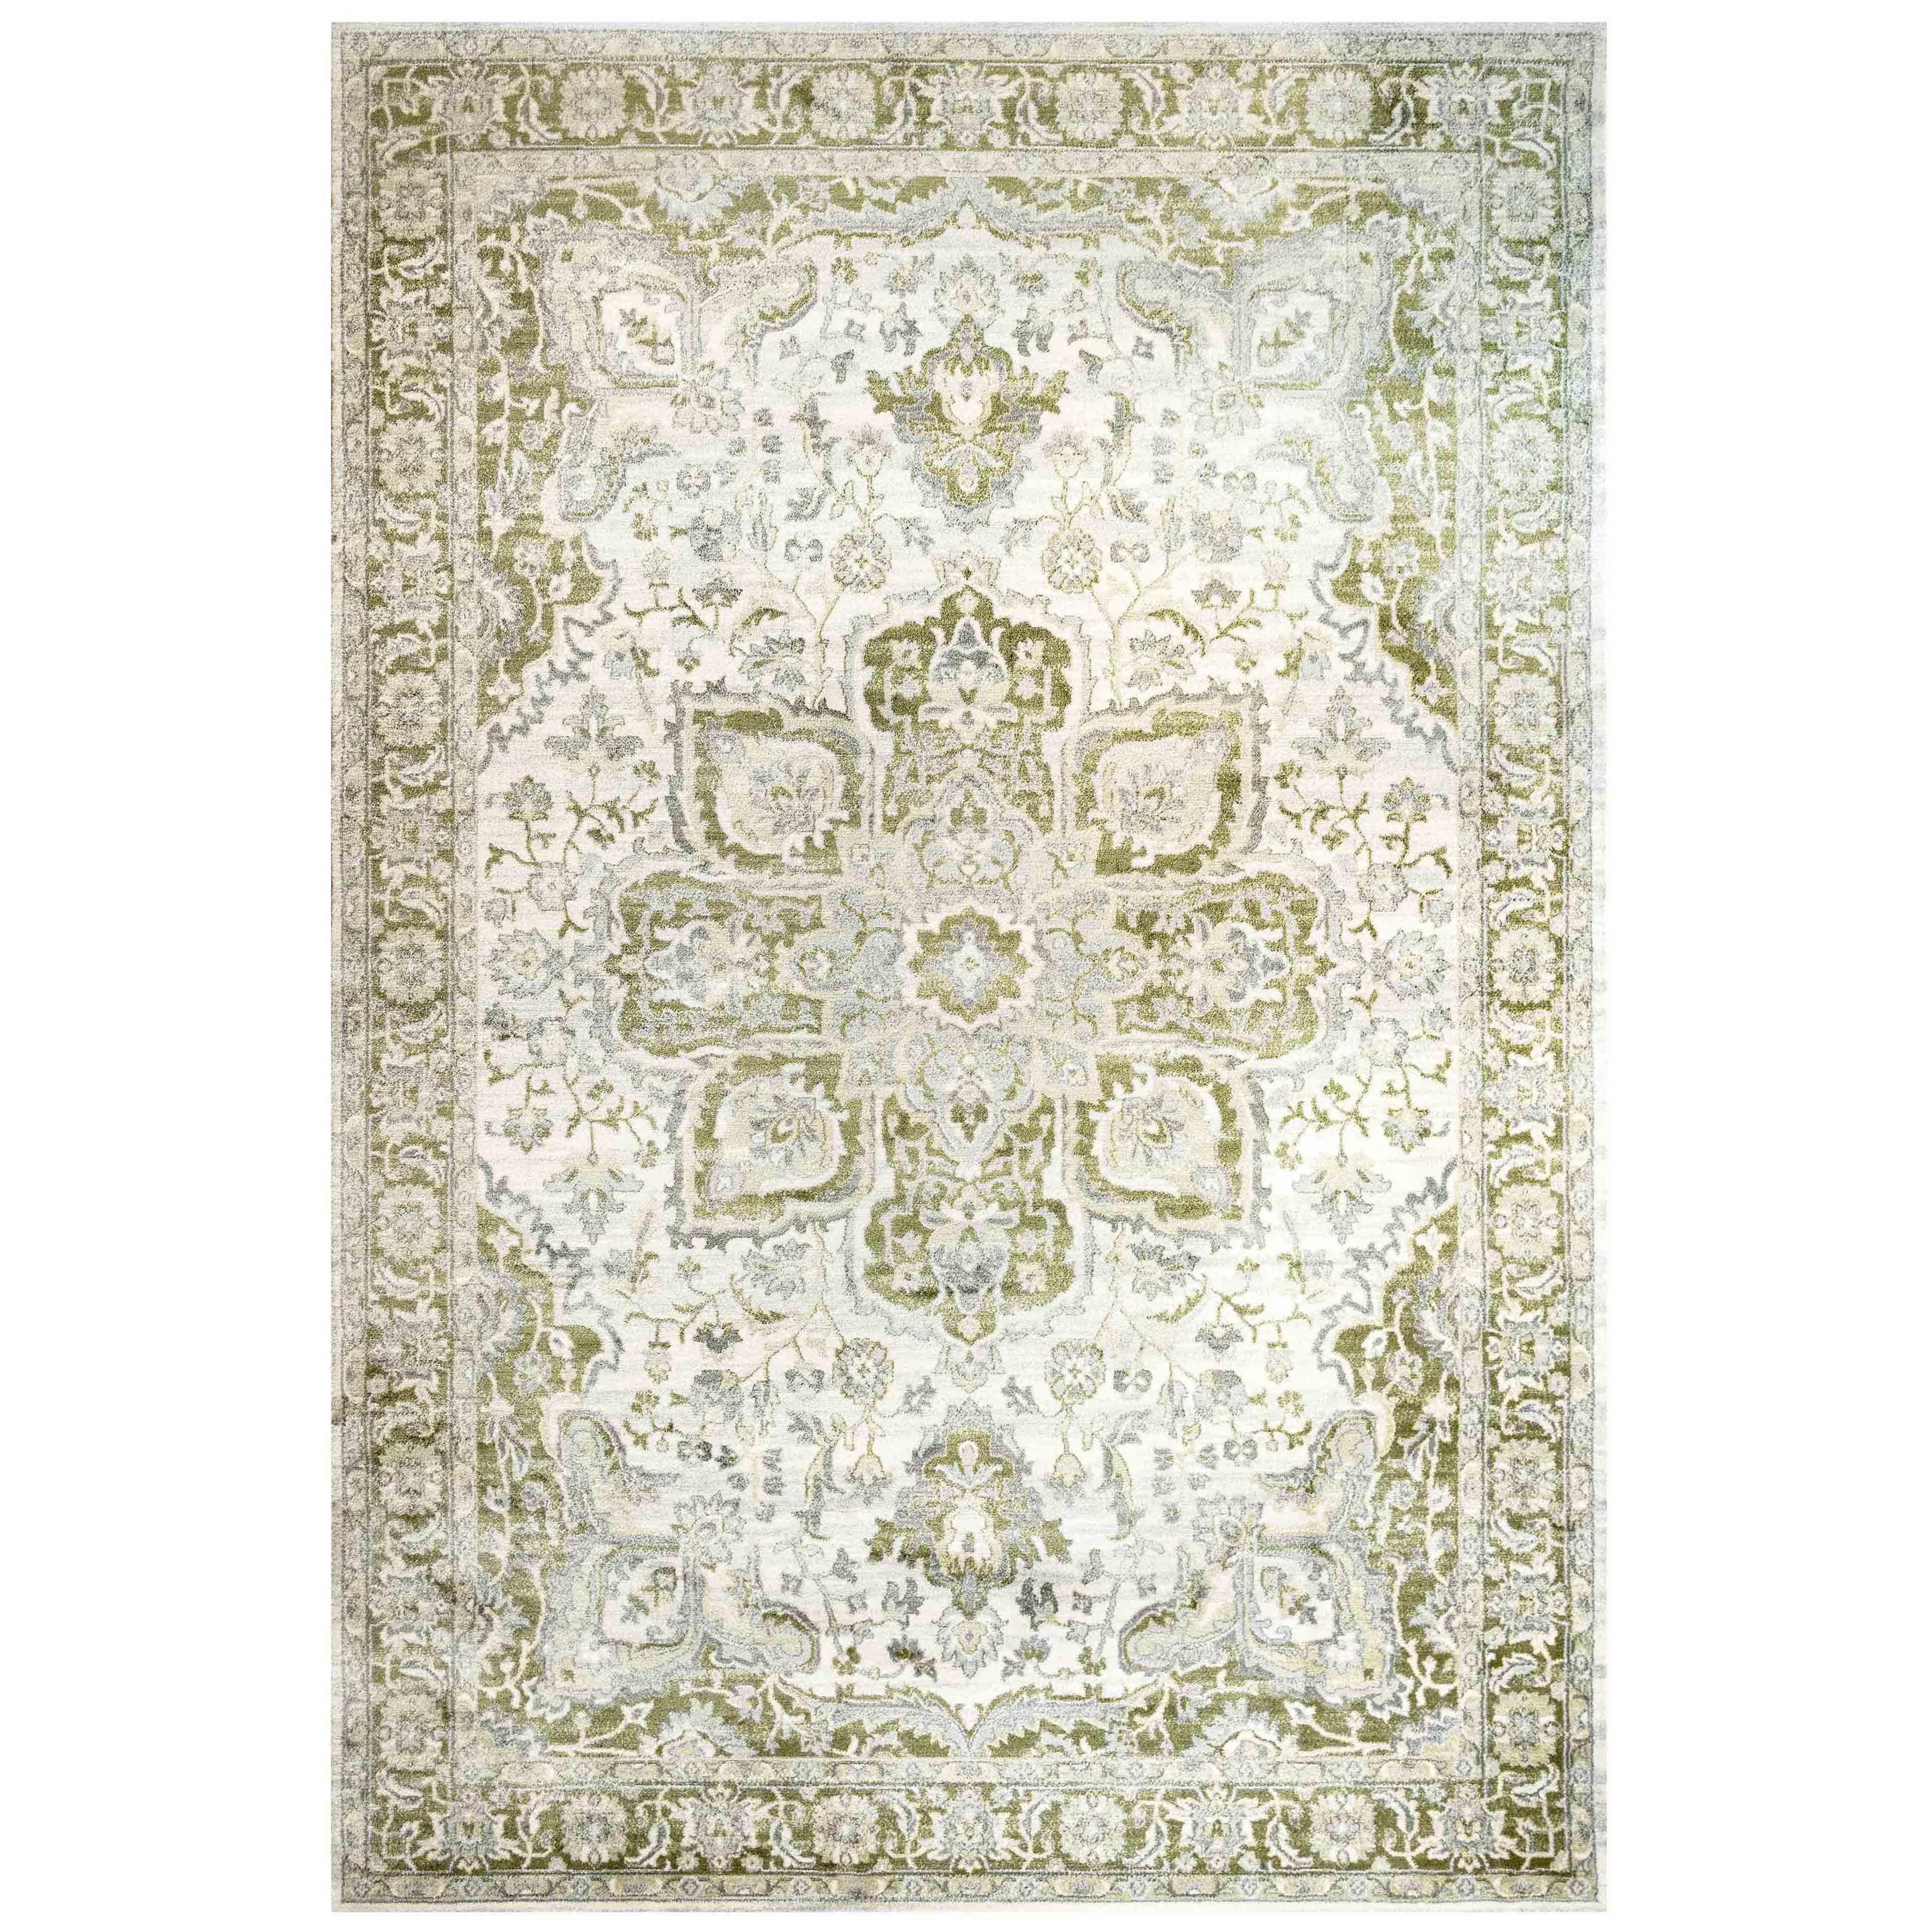 Green Traditional Floral Style Bordered Rug